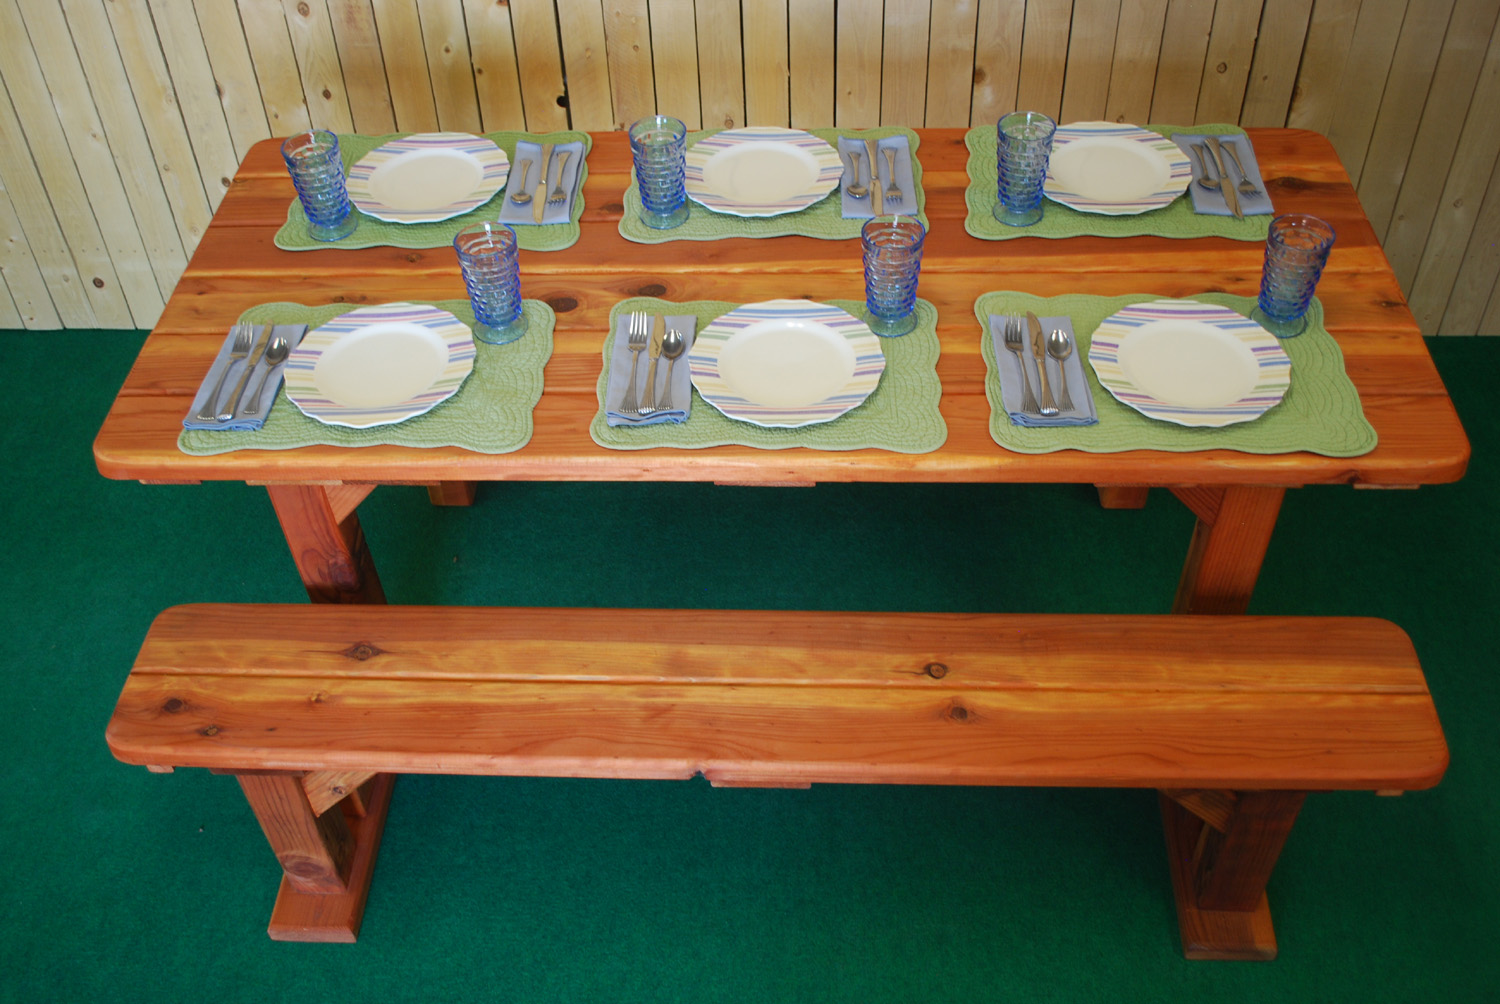 72" redwood rectangle picnic table